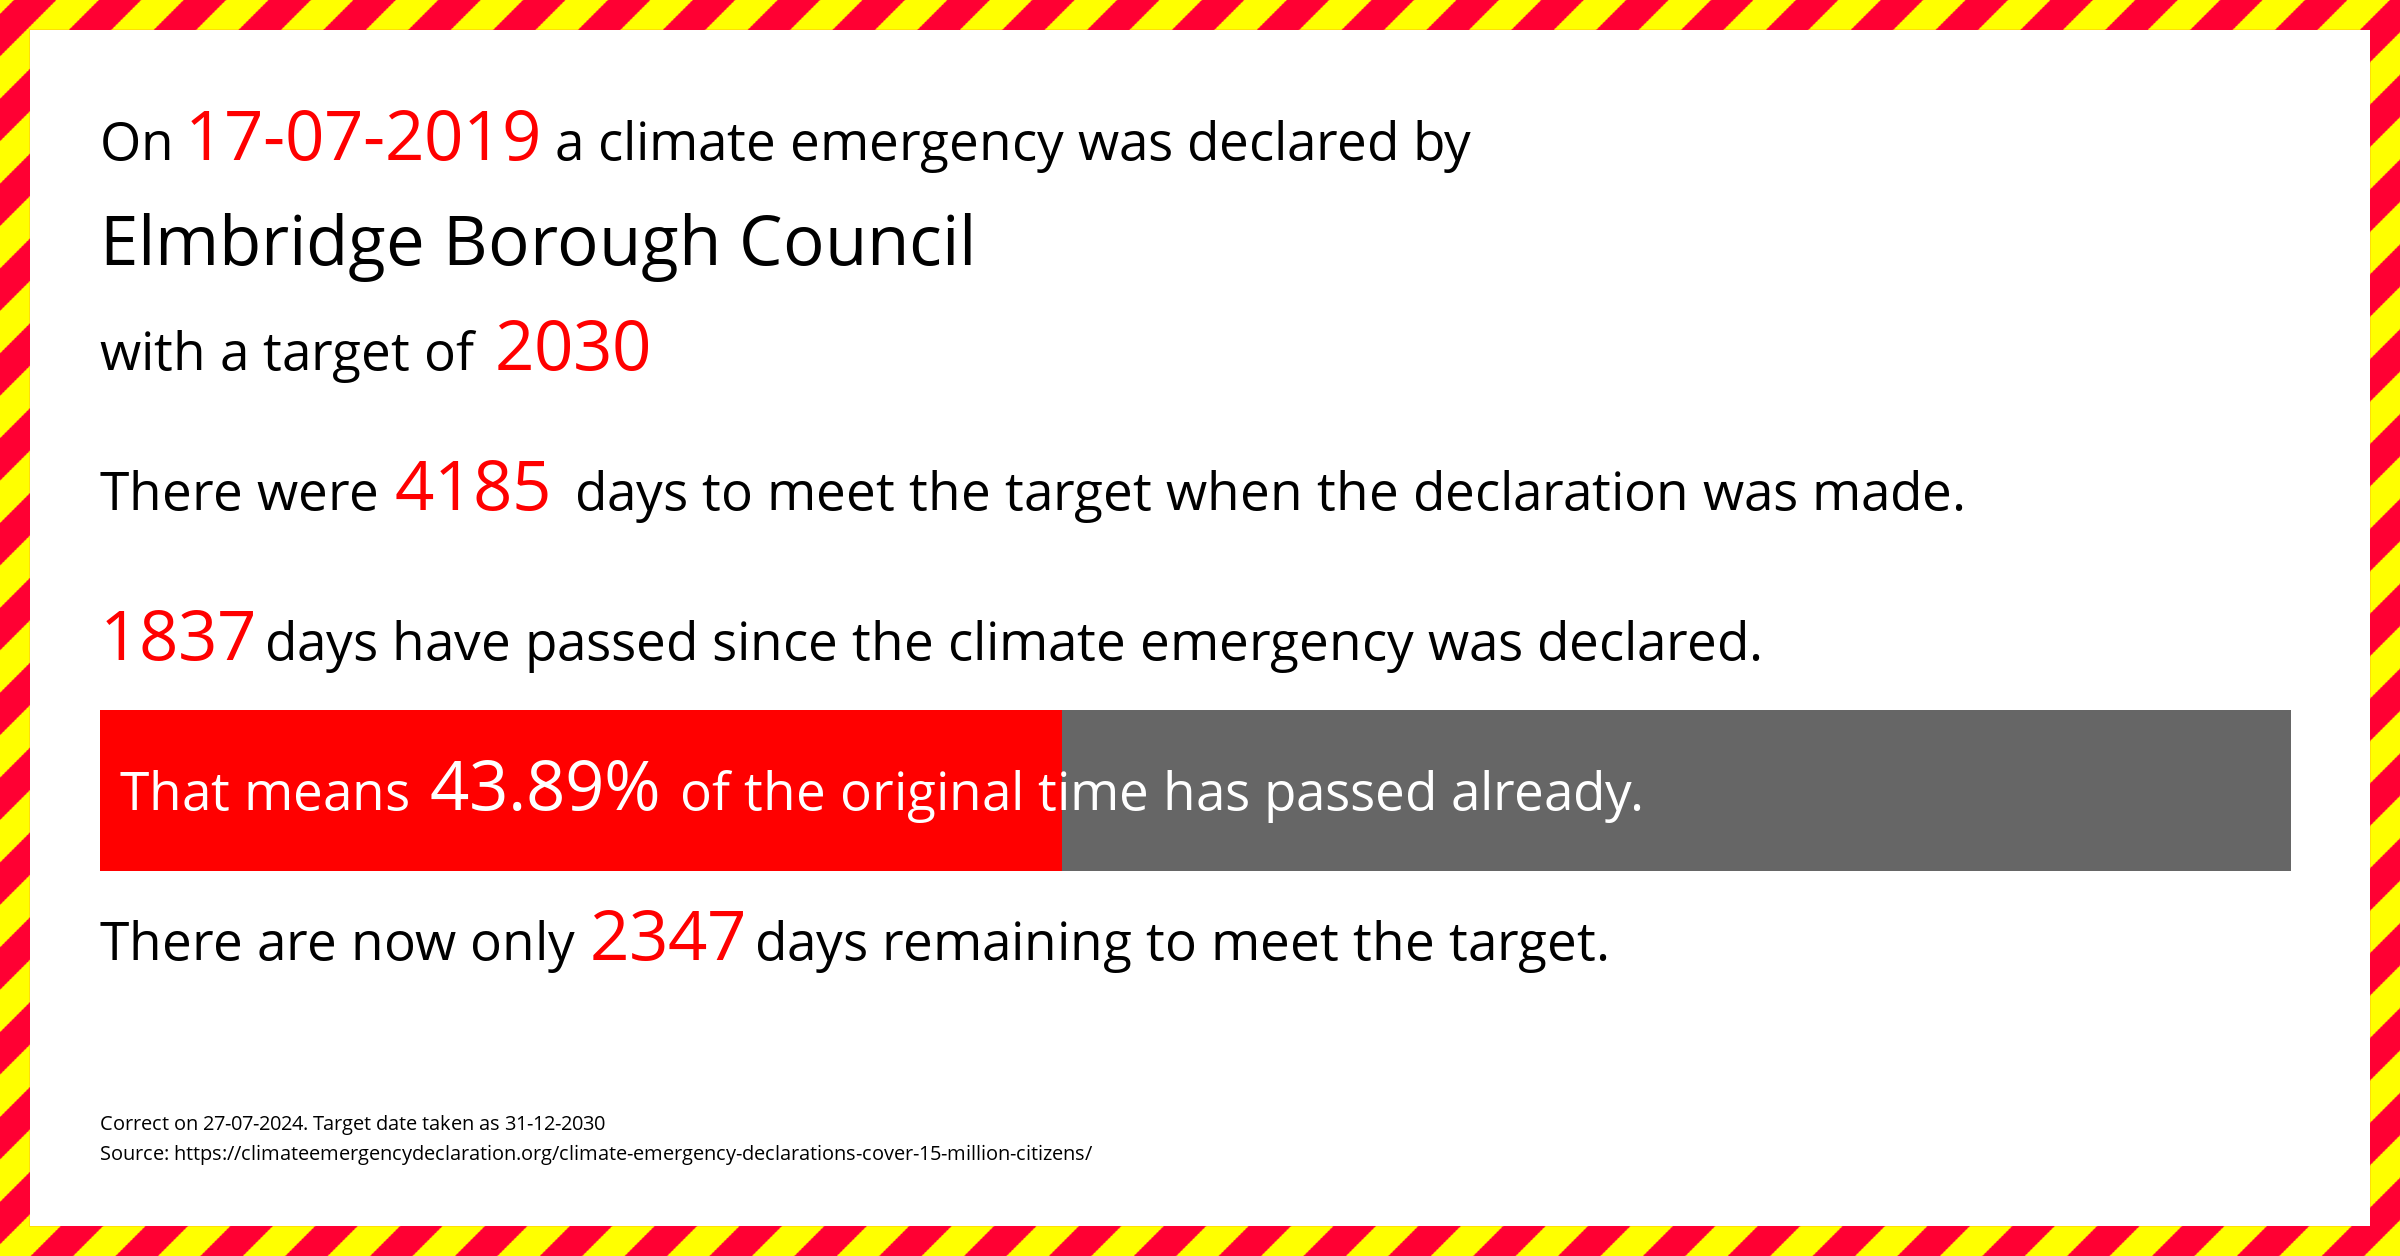 Elmbridge Borough Council declared a Climate emergency on Wednesday 17th July 2019, with a target of 2030.